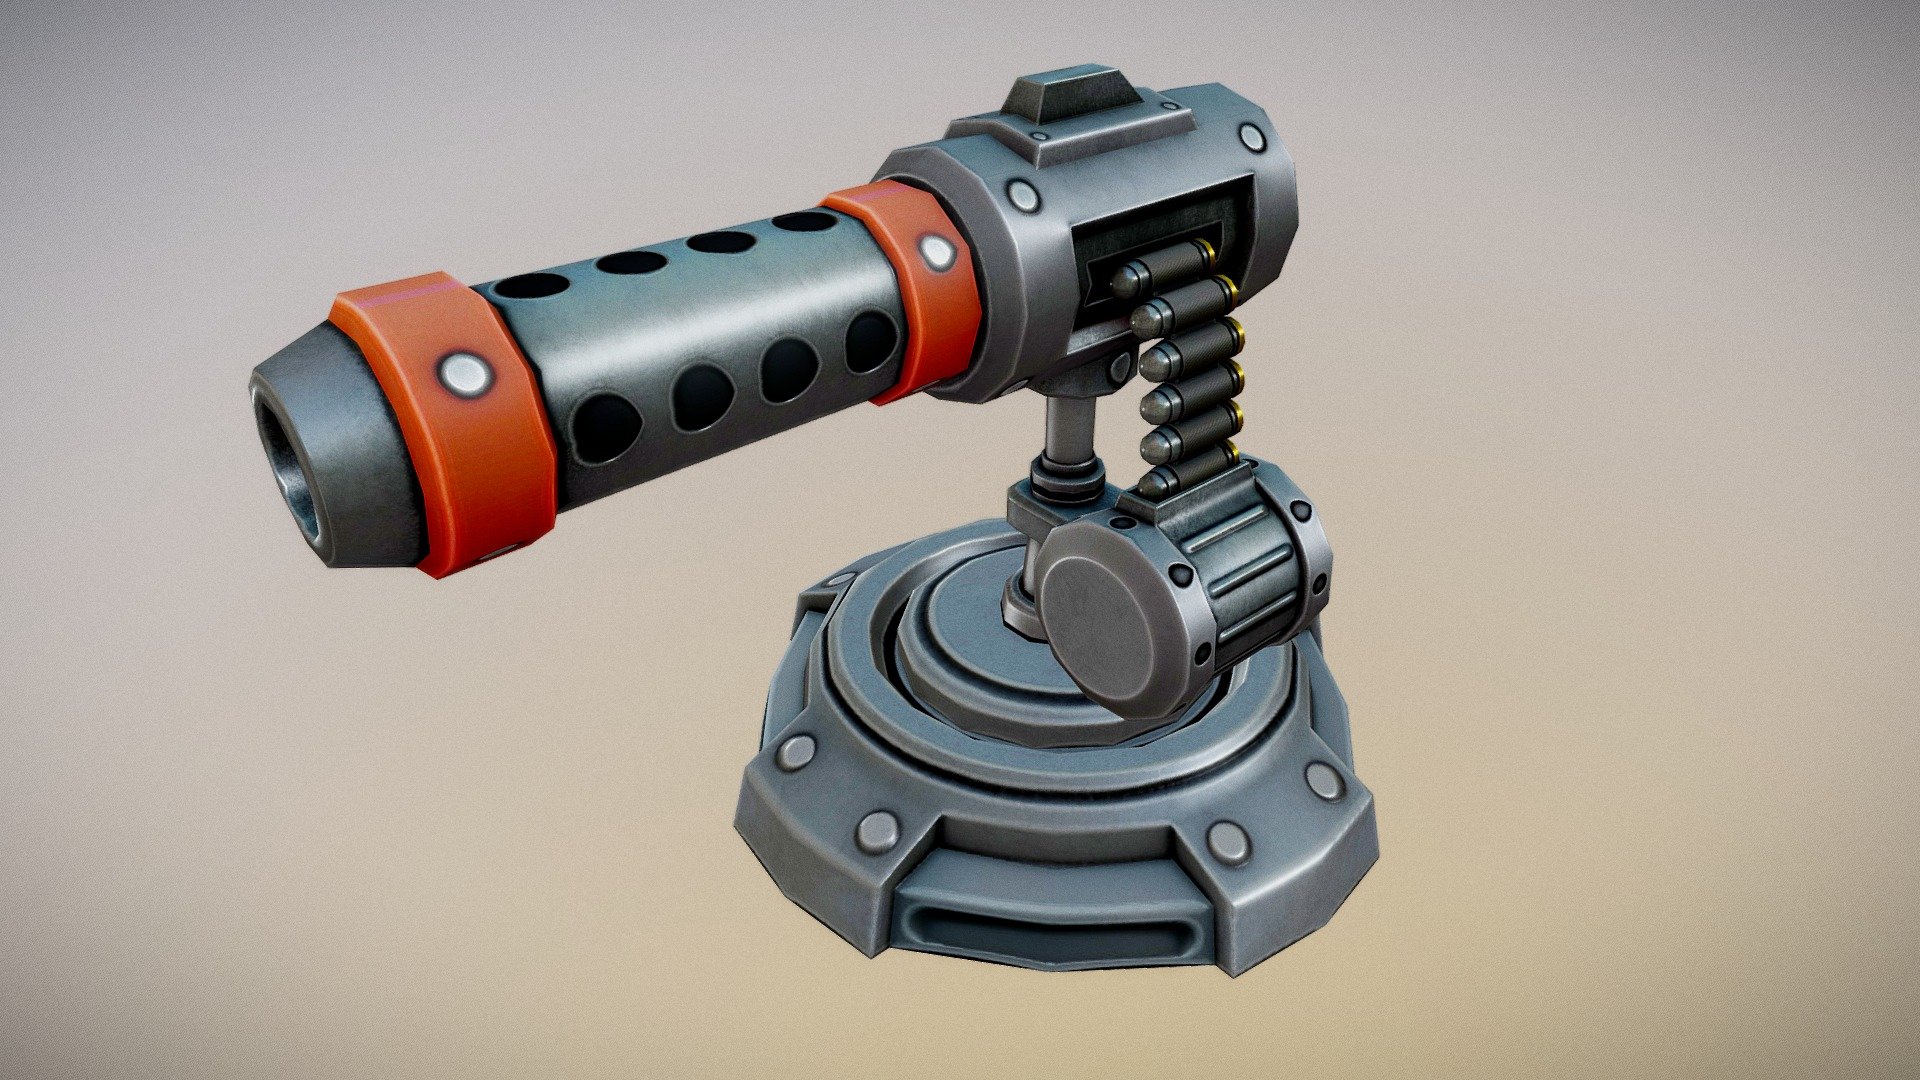 Stylized Machinegun Turret - Shadeless!

PBR Textures converted into a single Diffuse Map using Baked Light settings.

Perfect for mobile games etc 3d model